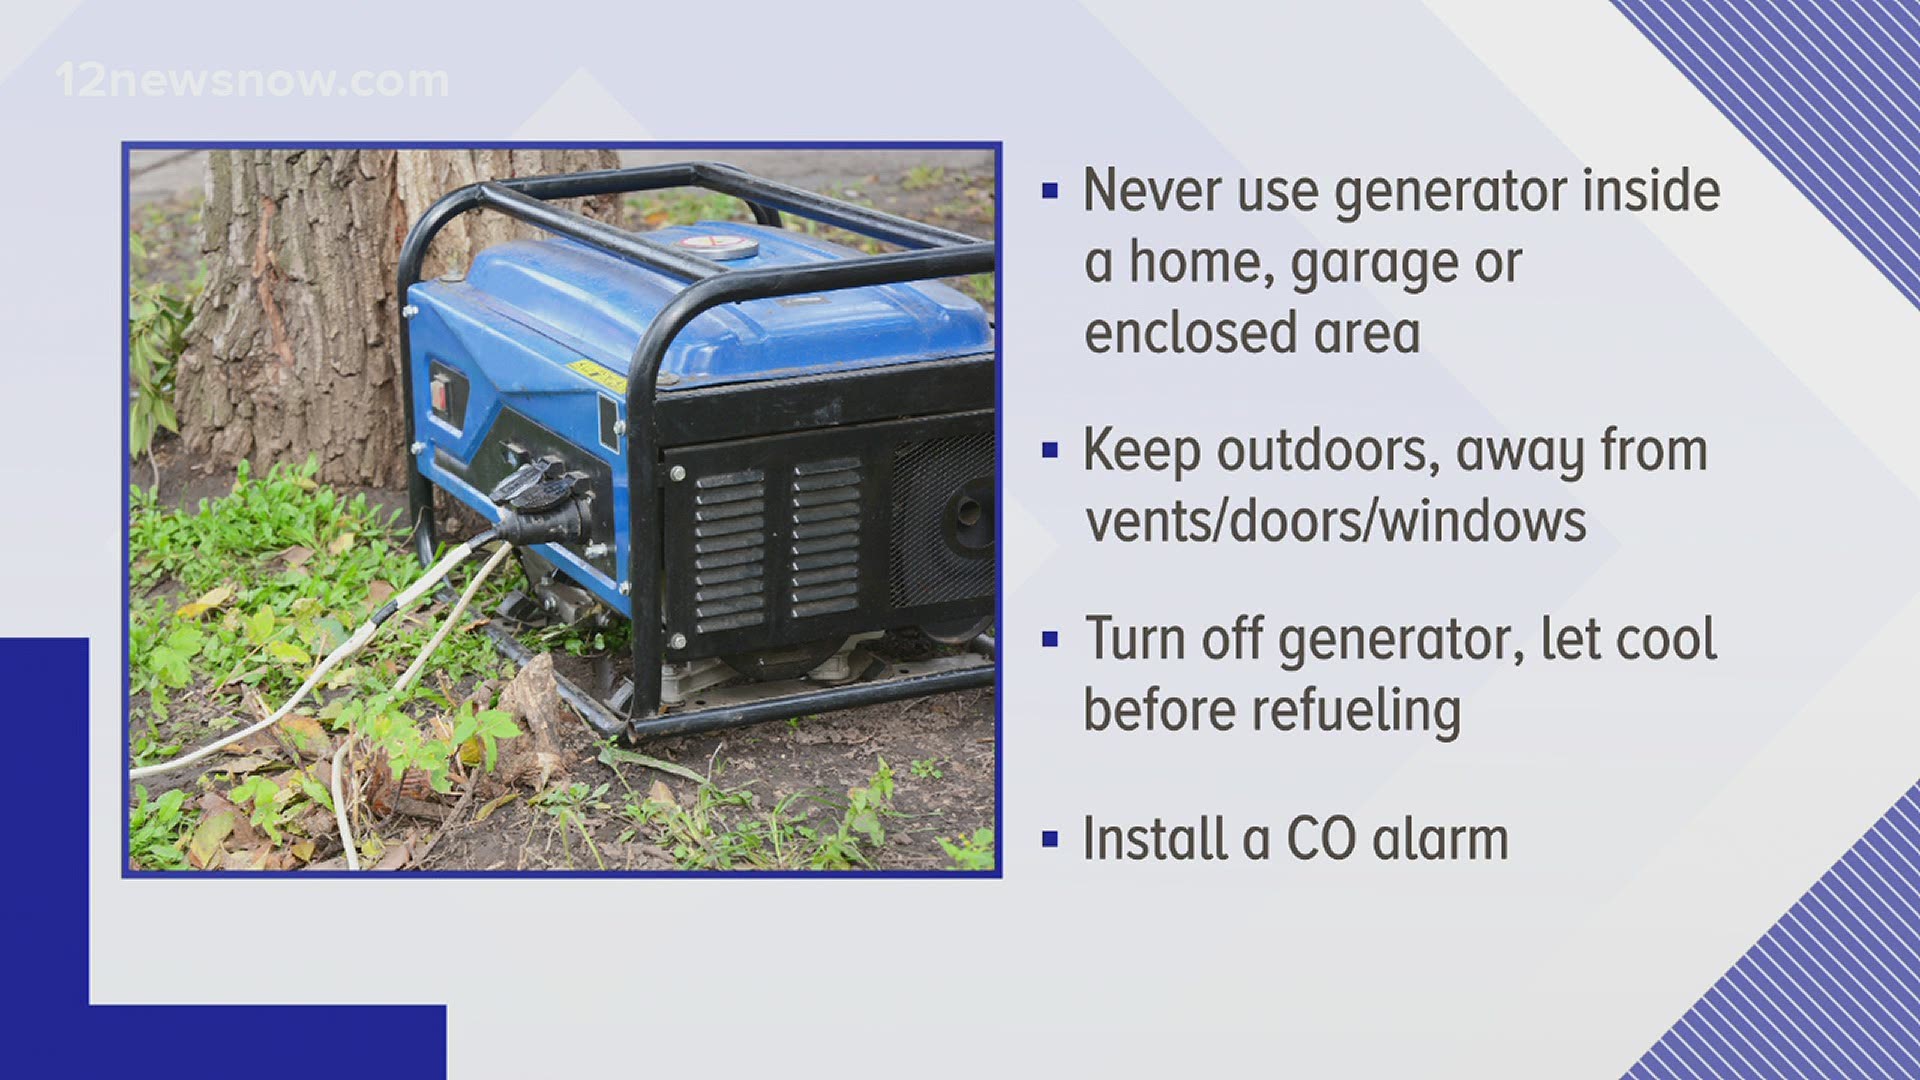 It's never too early to check on your generator and review a safety tips. As a reminder, never use one inside your home, garage or enclosed space.